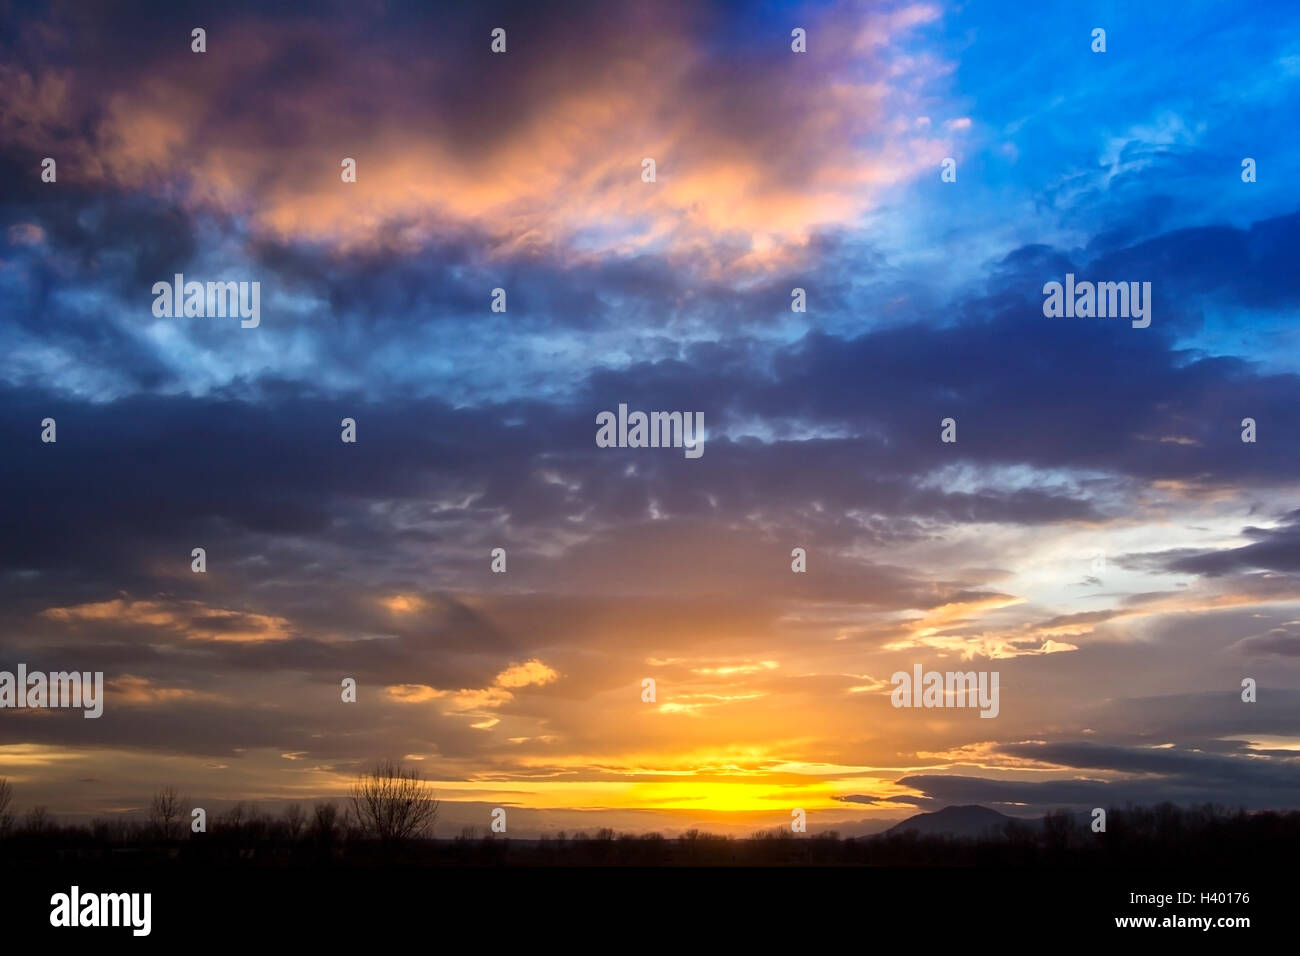 Landscape Dramatic sunset and sunrise sky with a silhouette of trees Stock Photo